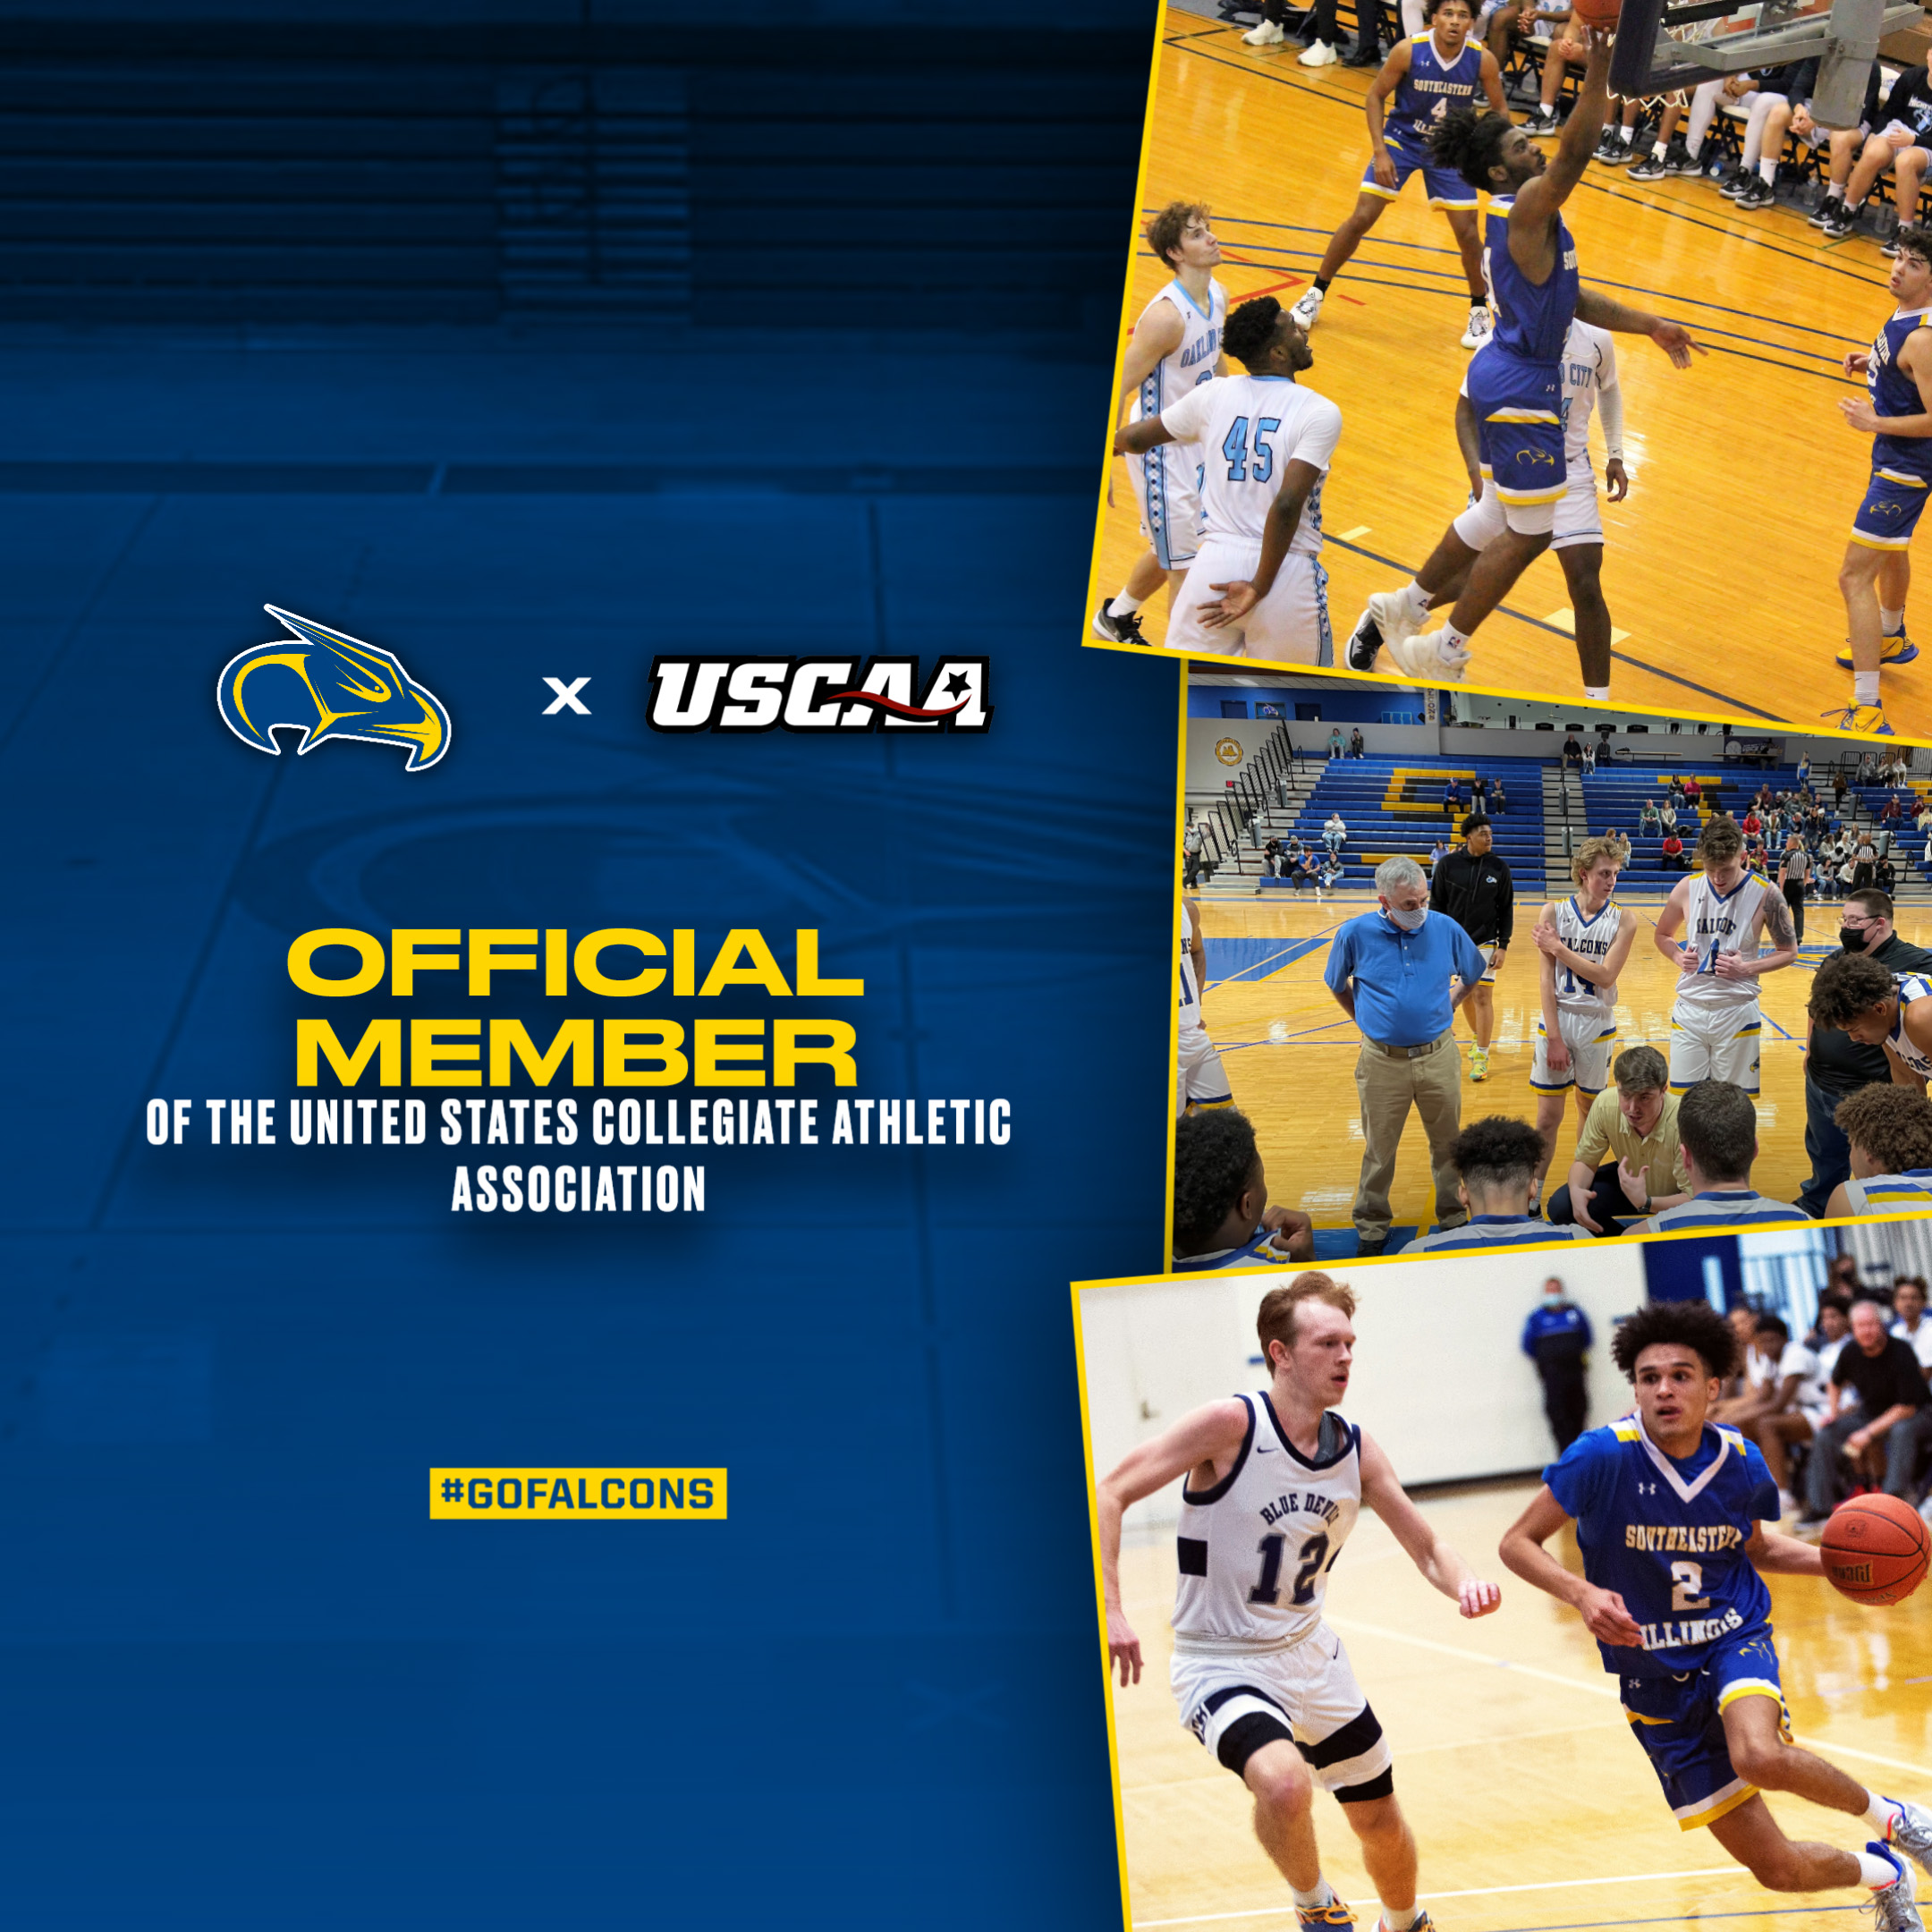 USCAA Official Member